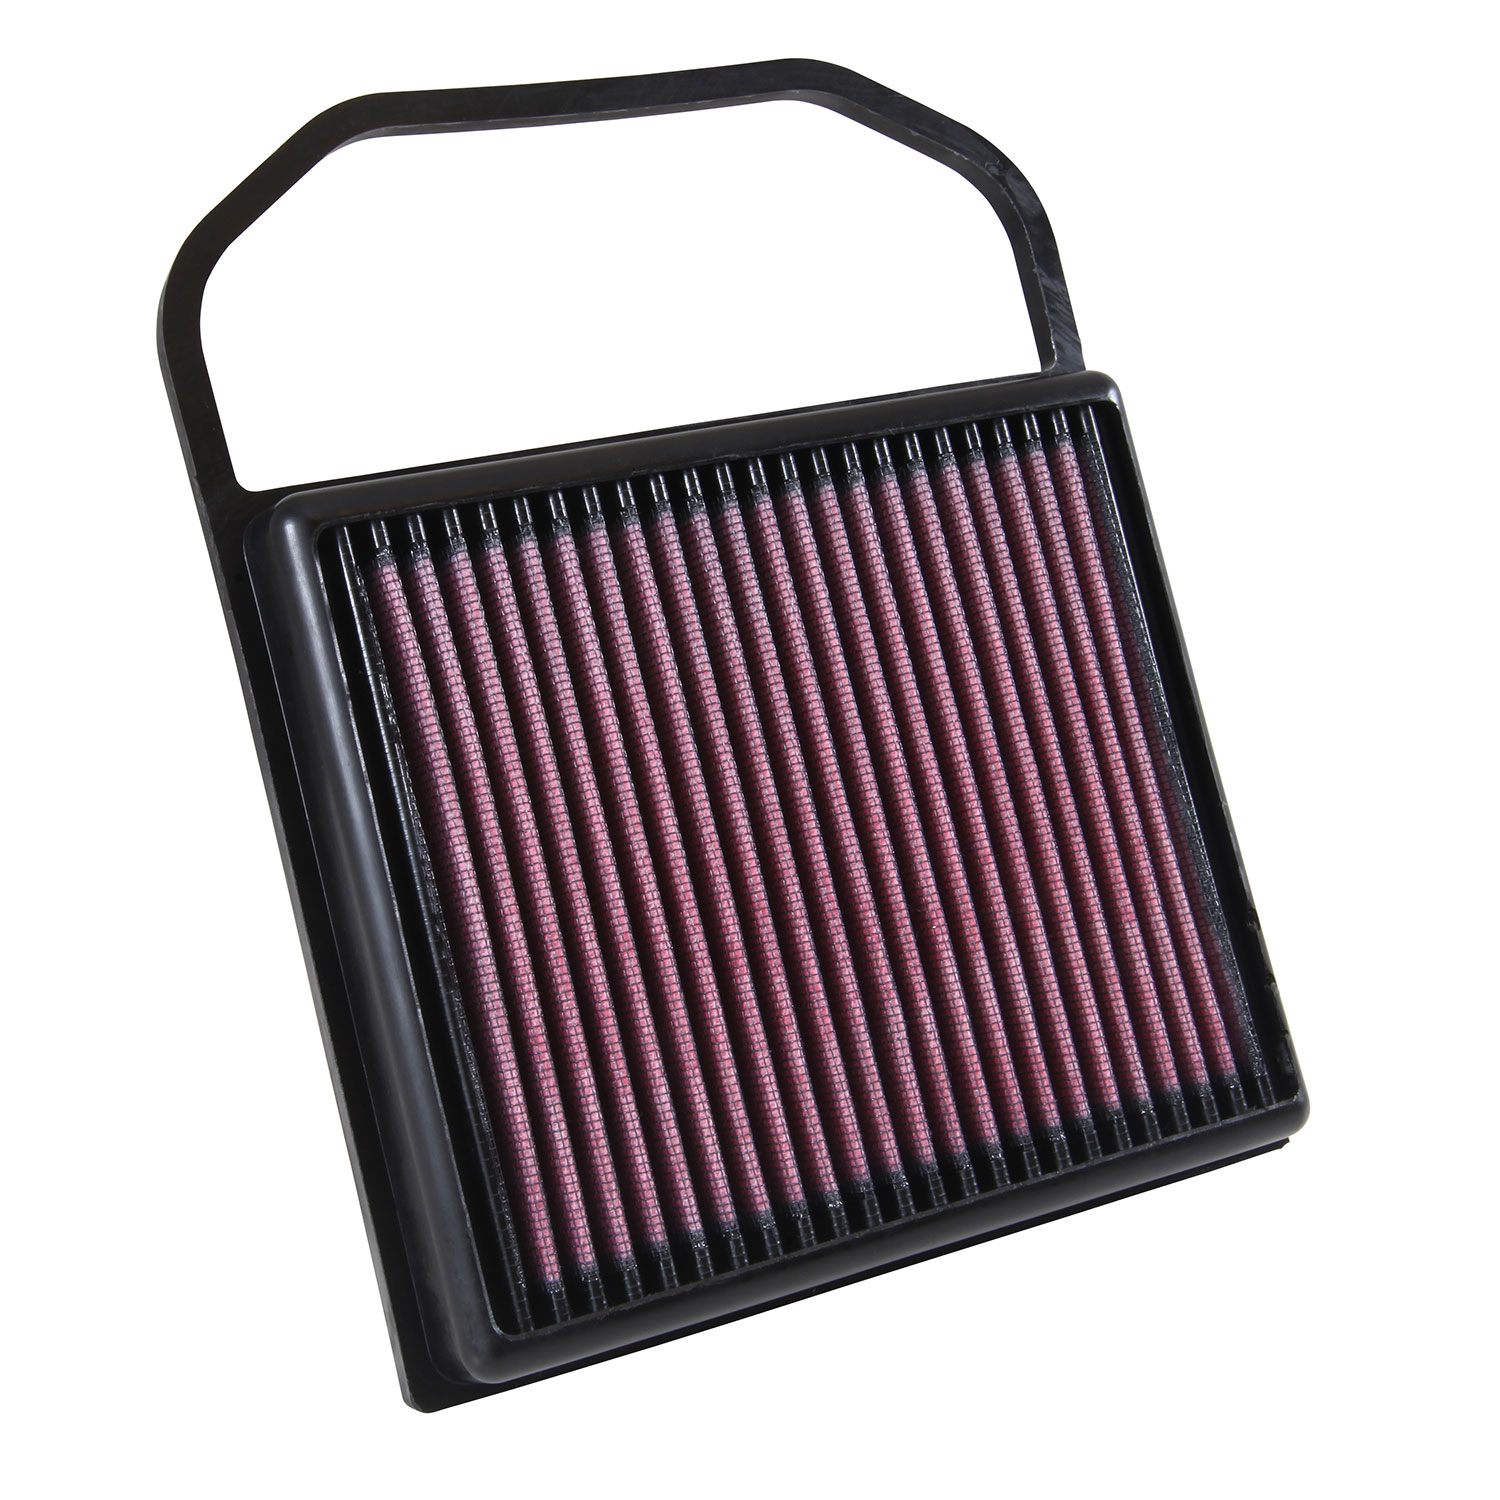 K&N K&N Engine Air Filter: High Performance, Premium, Washable, Replacement Filter: 2014-2019 Mercedes V6 (C400, C43 AMG, C450 AMG, E450, GLC43AMG, GLE400, GLS 400 and other select models), 33-5032